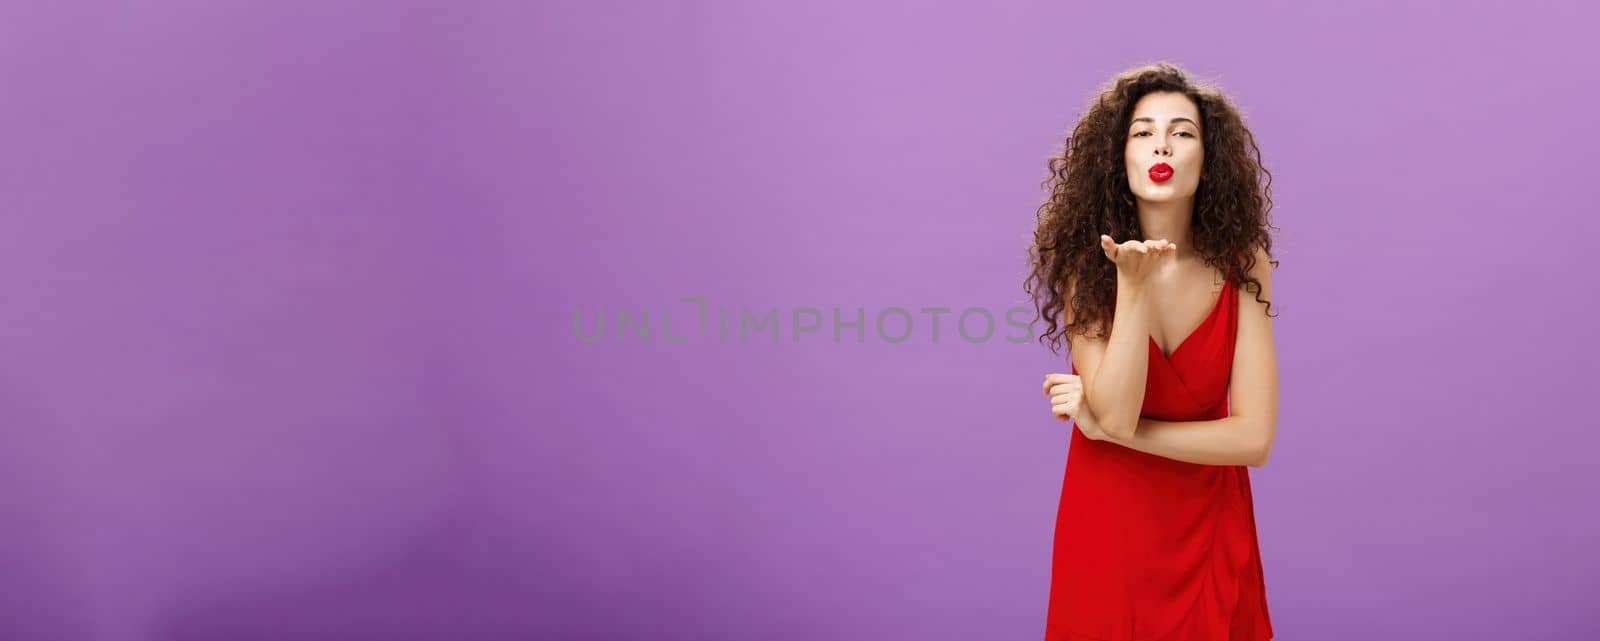 Woman sending passionate kiss being hopeless romantic. standing in elegant red dress with curly hairstyle and makeup blowing mwah with smile and folded lips holding palm near mouth over purple wall.